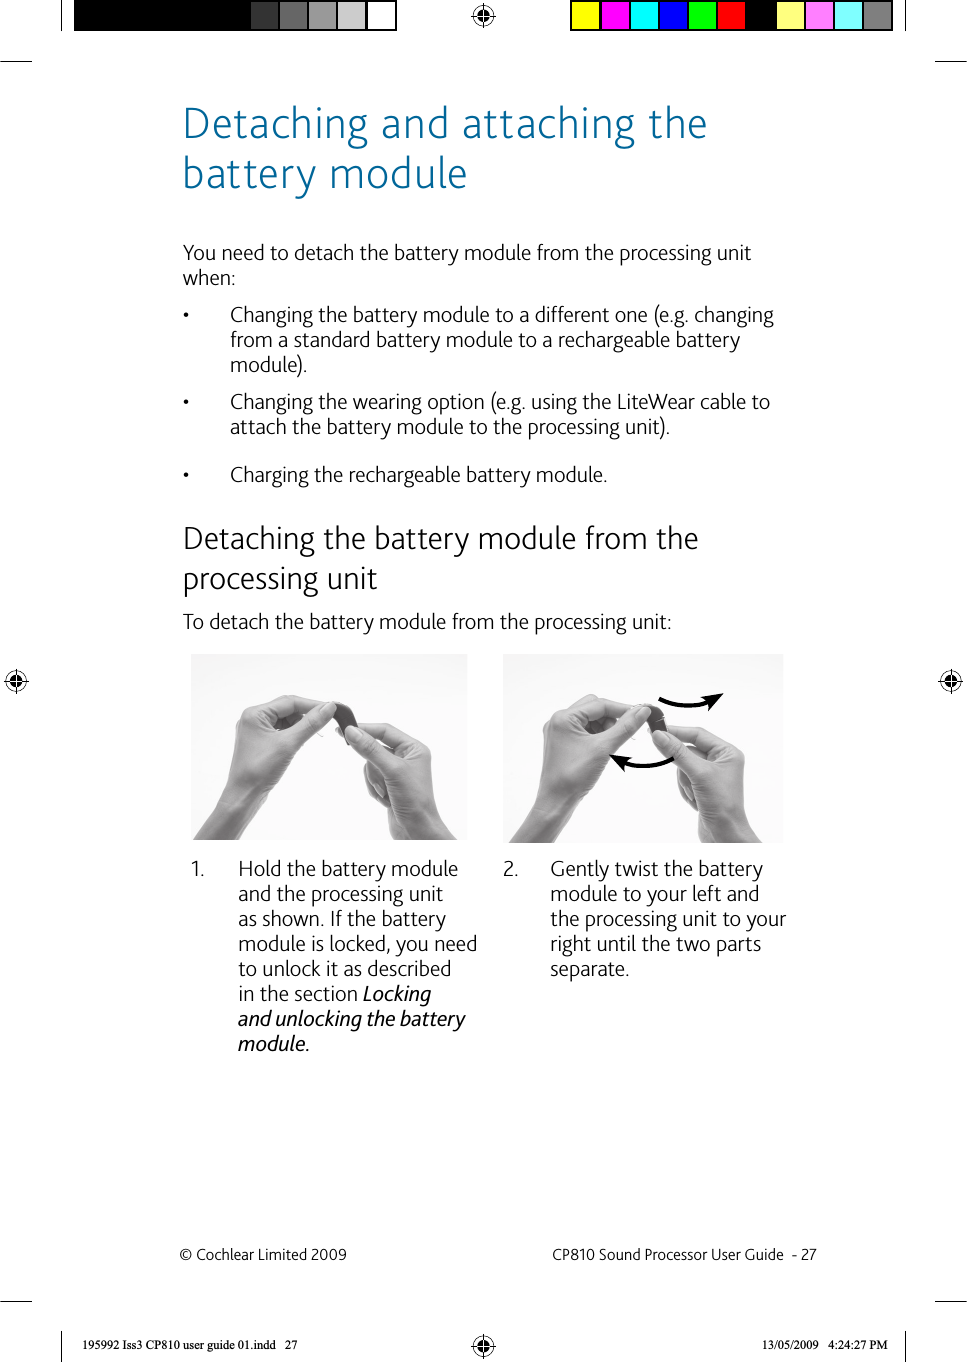 Detaching and attaching the battery module You need to detach the battery module from the processing unit when:Changing the battery module to a different one (e.g. changing • from a standard battery module to a rechargeable battery module).Changing the wearing option (e.g. using the LiteWear cable to • attach the battery module to the processing unit).Charging the rechargeable battery module.•   Detaching the battery module from the processing unitTo detach the battery module from the processing unit:Hold the battery module 1. and the processing unit as shown. If the battery module is locked, you need to unlock it as described in the section Locking and unlocking the battery module.Gently twist the battery 2. module to your left and the processing unit to your right until the two parts separate.© Cochlear Limited 2009  CP810 Sound Processor User Guide  - 27195992 Iss3 CP810 user guide 01.indd   27 13/05/2009   4:24:27 PM